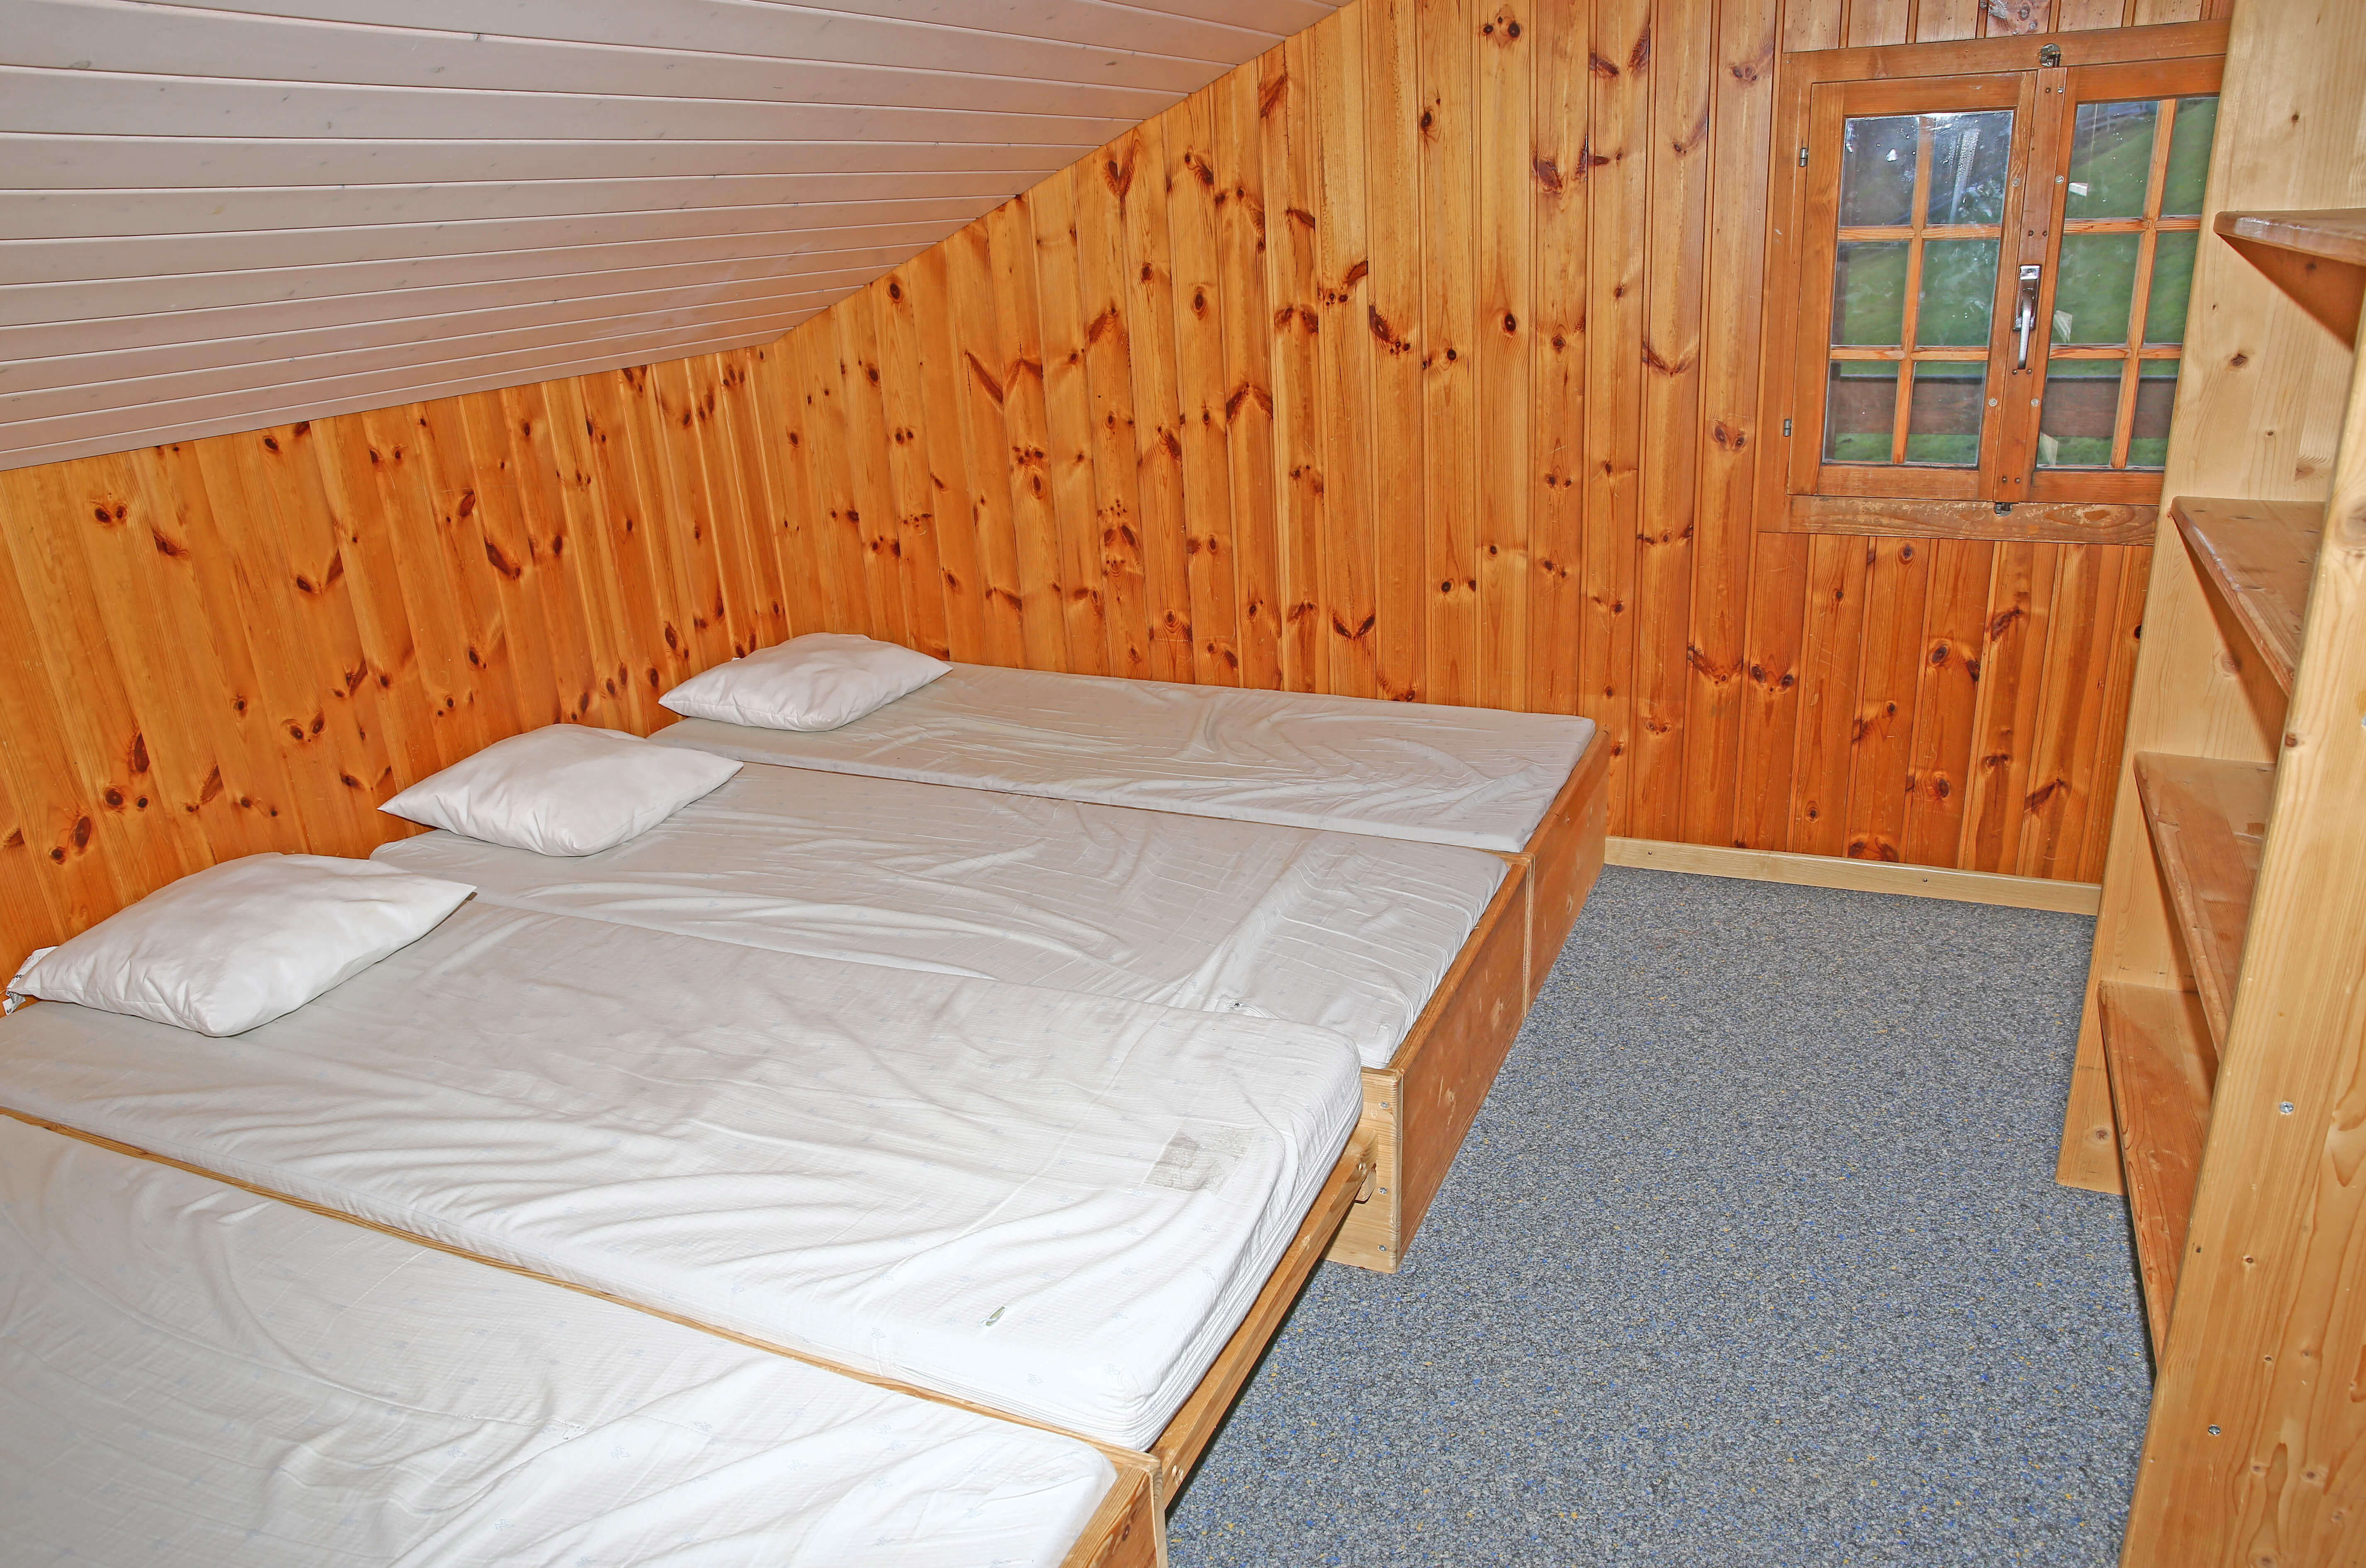 Room with dormitory